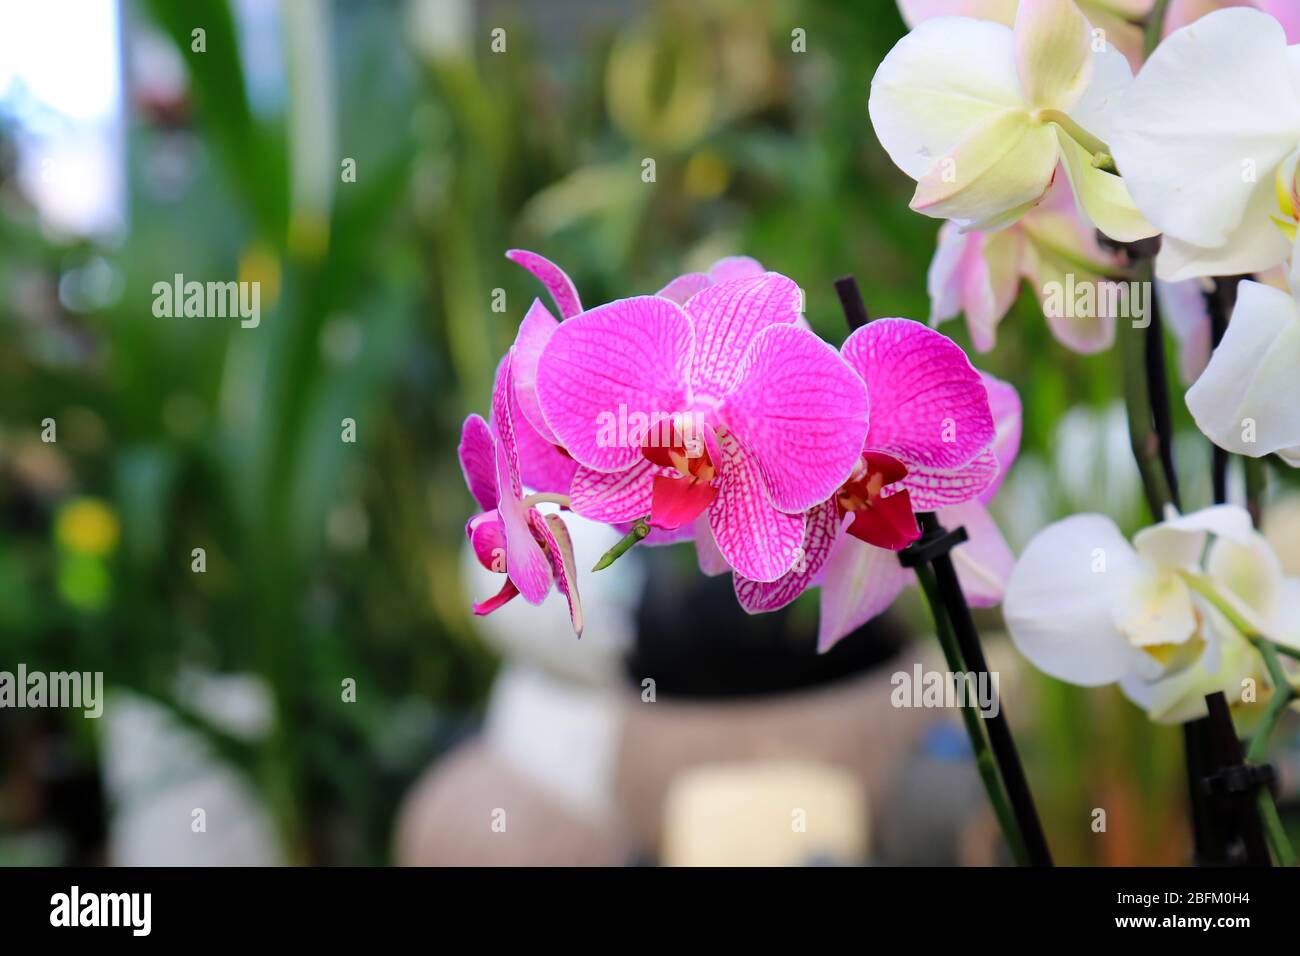 Phalaenopsis Orchid pink flowers in the store. Flowering plant, floral background. Beautiful flowers at greenhouse. Flower shop, market. Potted Orchid Stock Photo